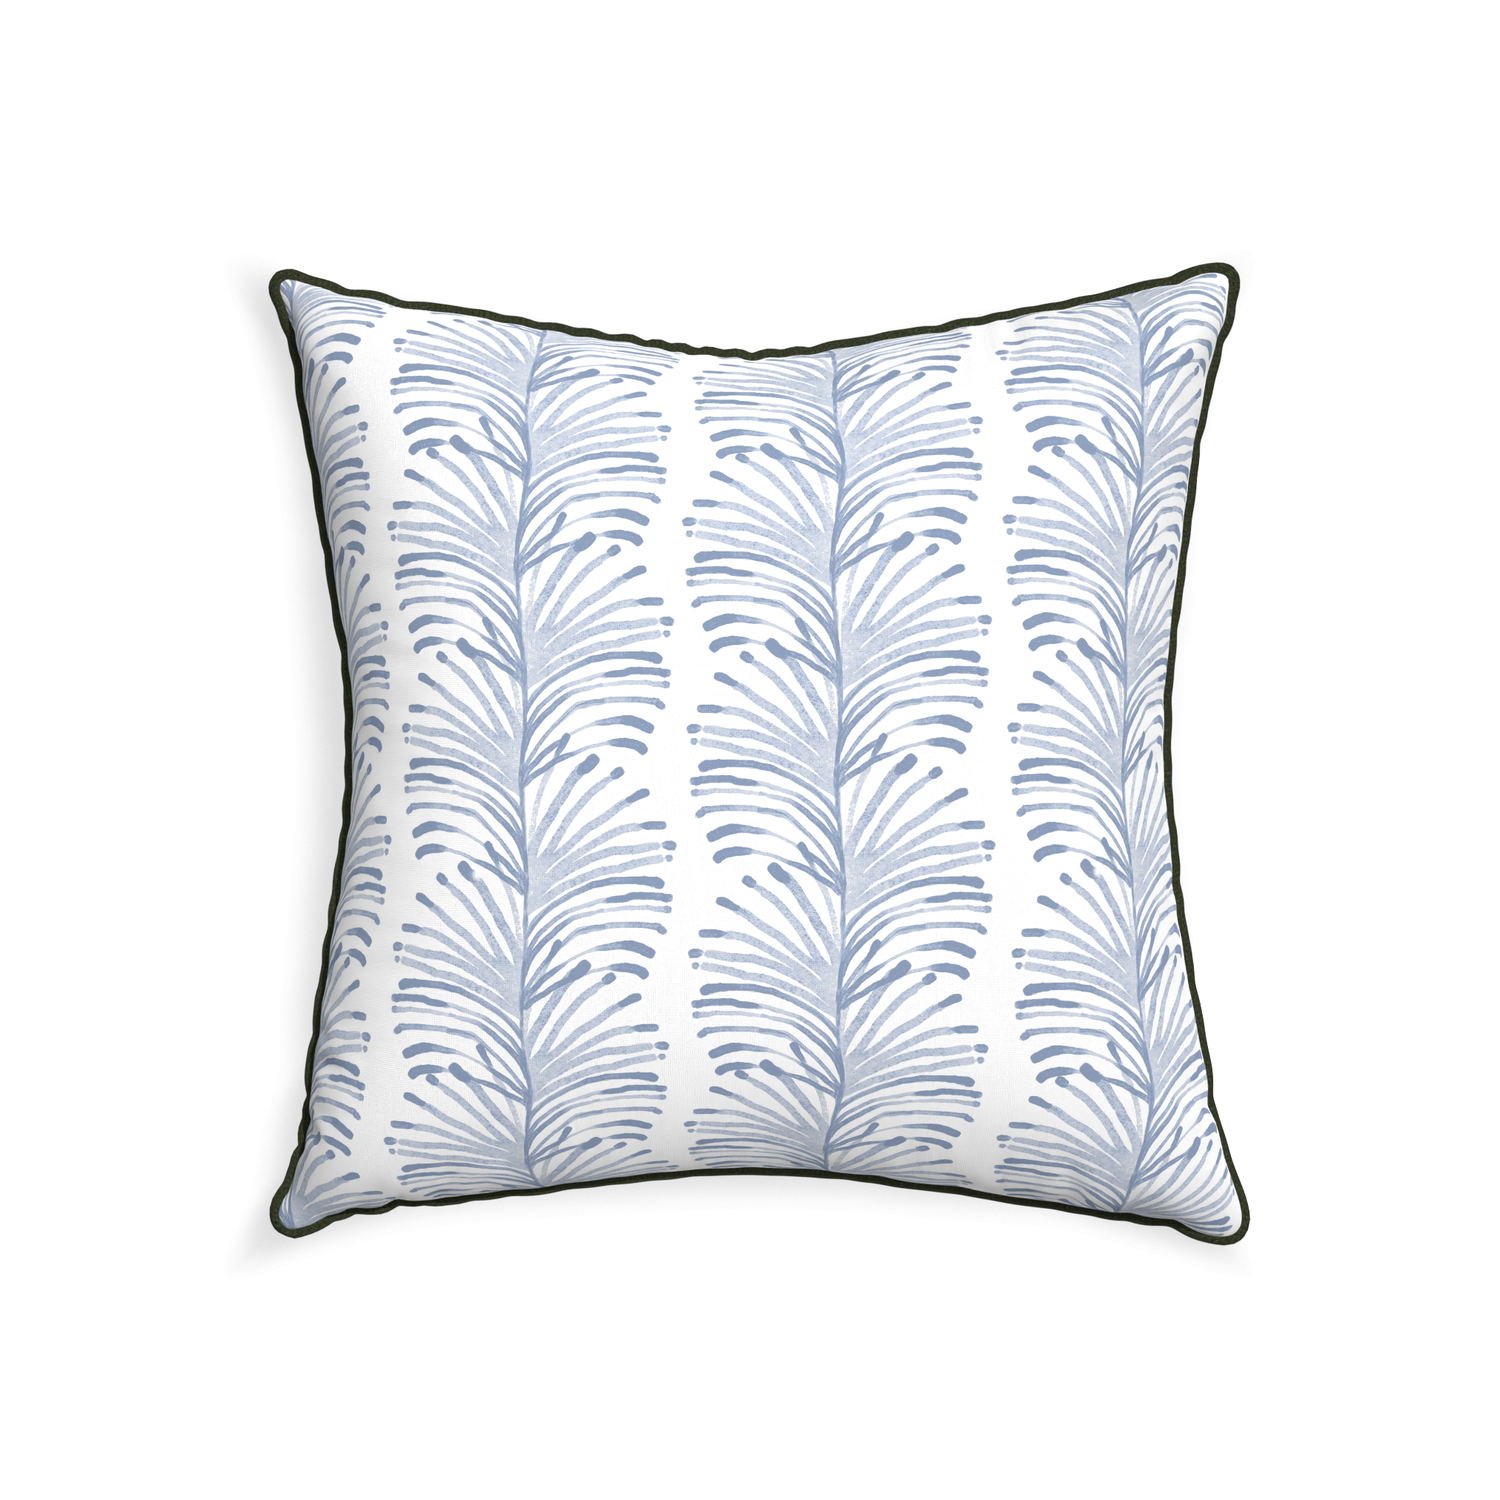 22-square emma sky custom sky blue botanical stripepillow with f piping on white background